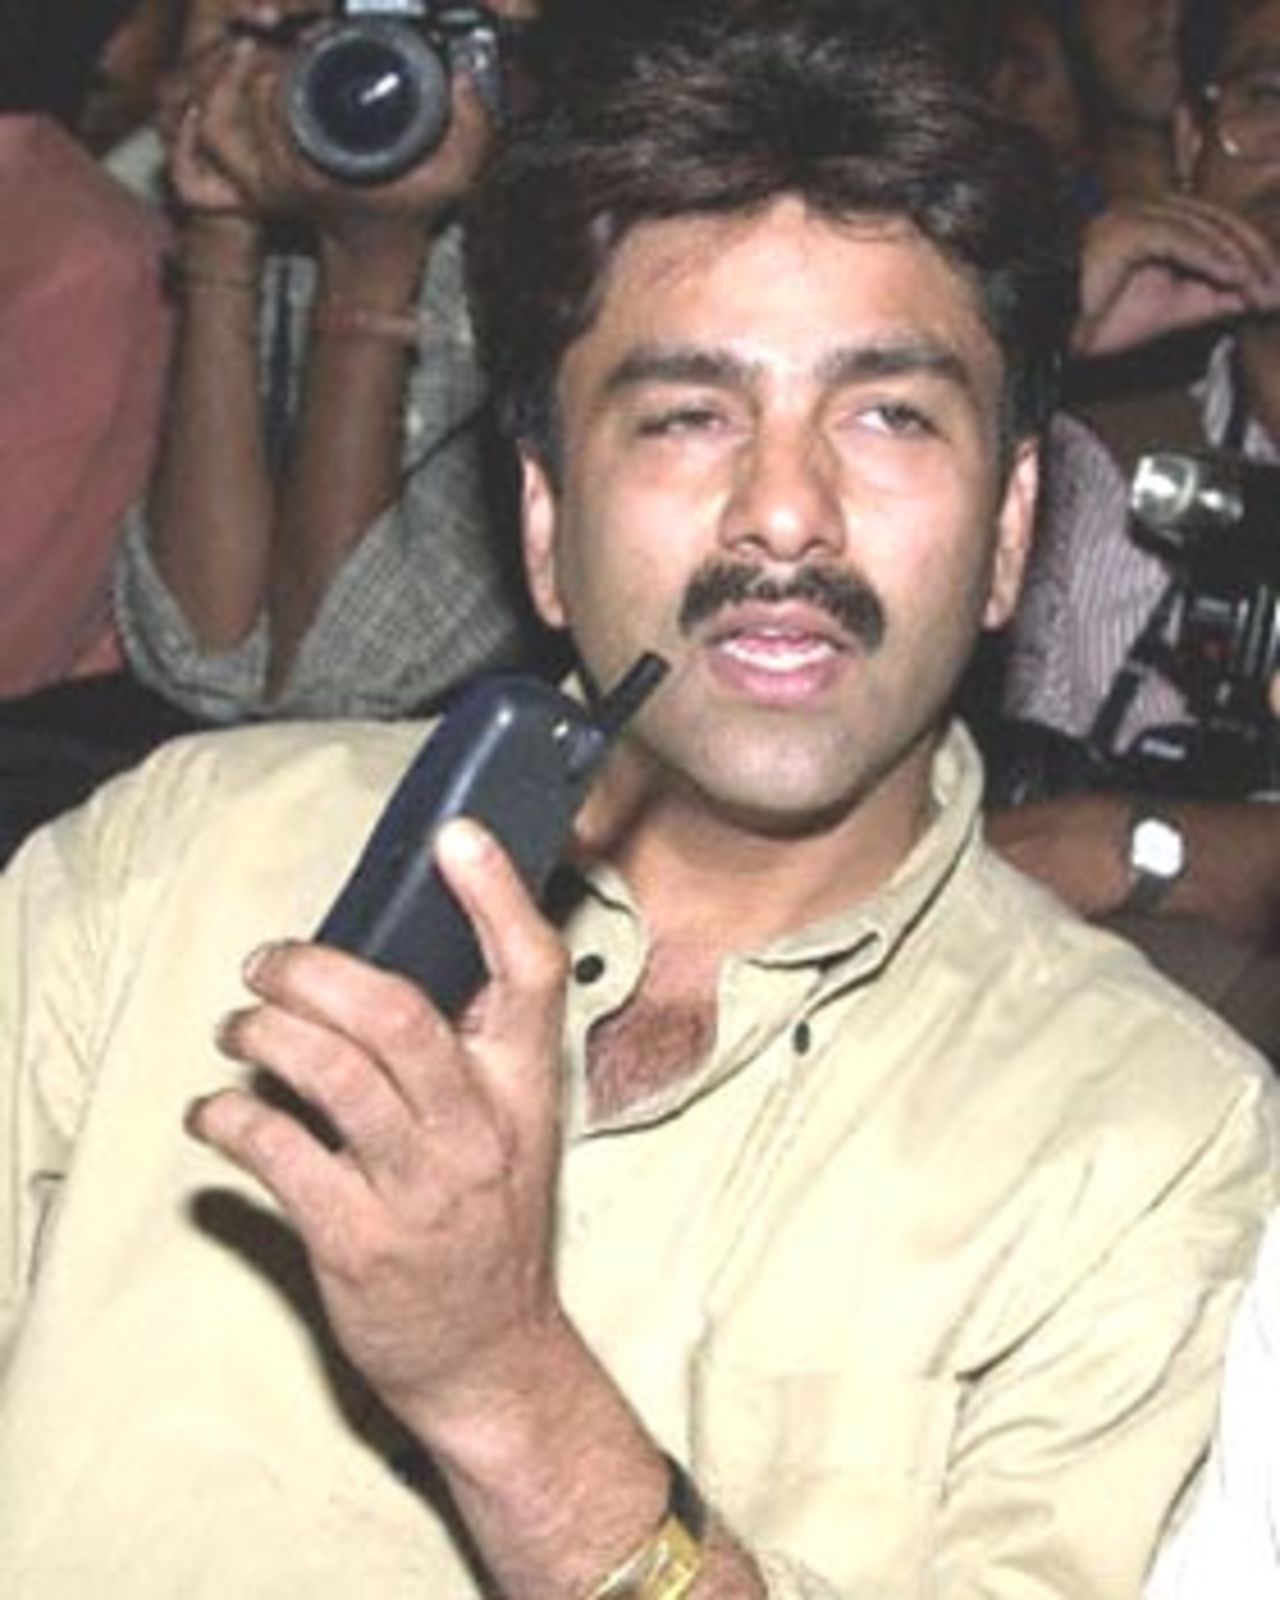 Former Indian all-round cricketer Manjo Prabhakar gestures at a press conference in New Delhi, 27 May 2000. Prabhakar said Indian cricketing icon Kapil Dev had offered him 2,5 million rupees (58,139 USD) in 1994 to throw a match against Pakistan.